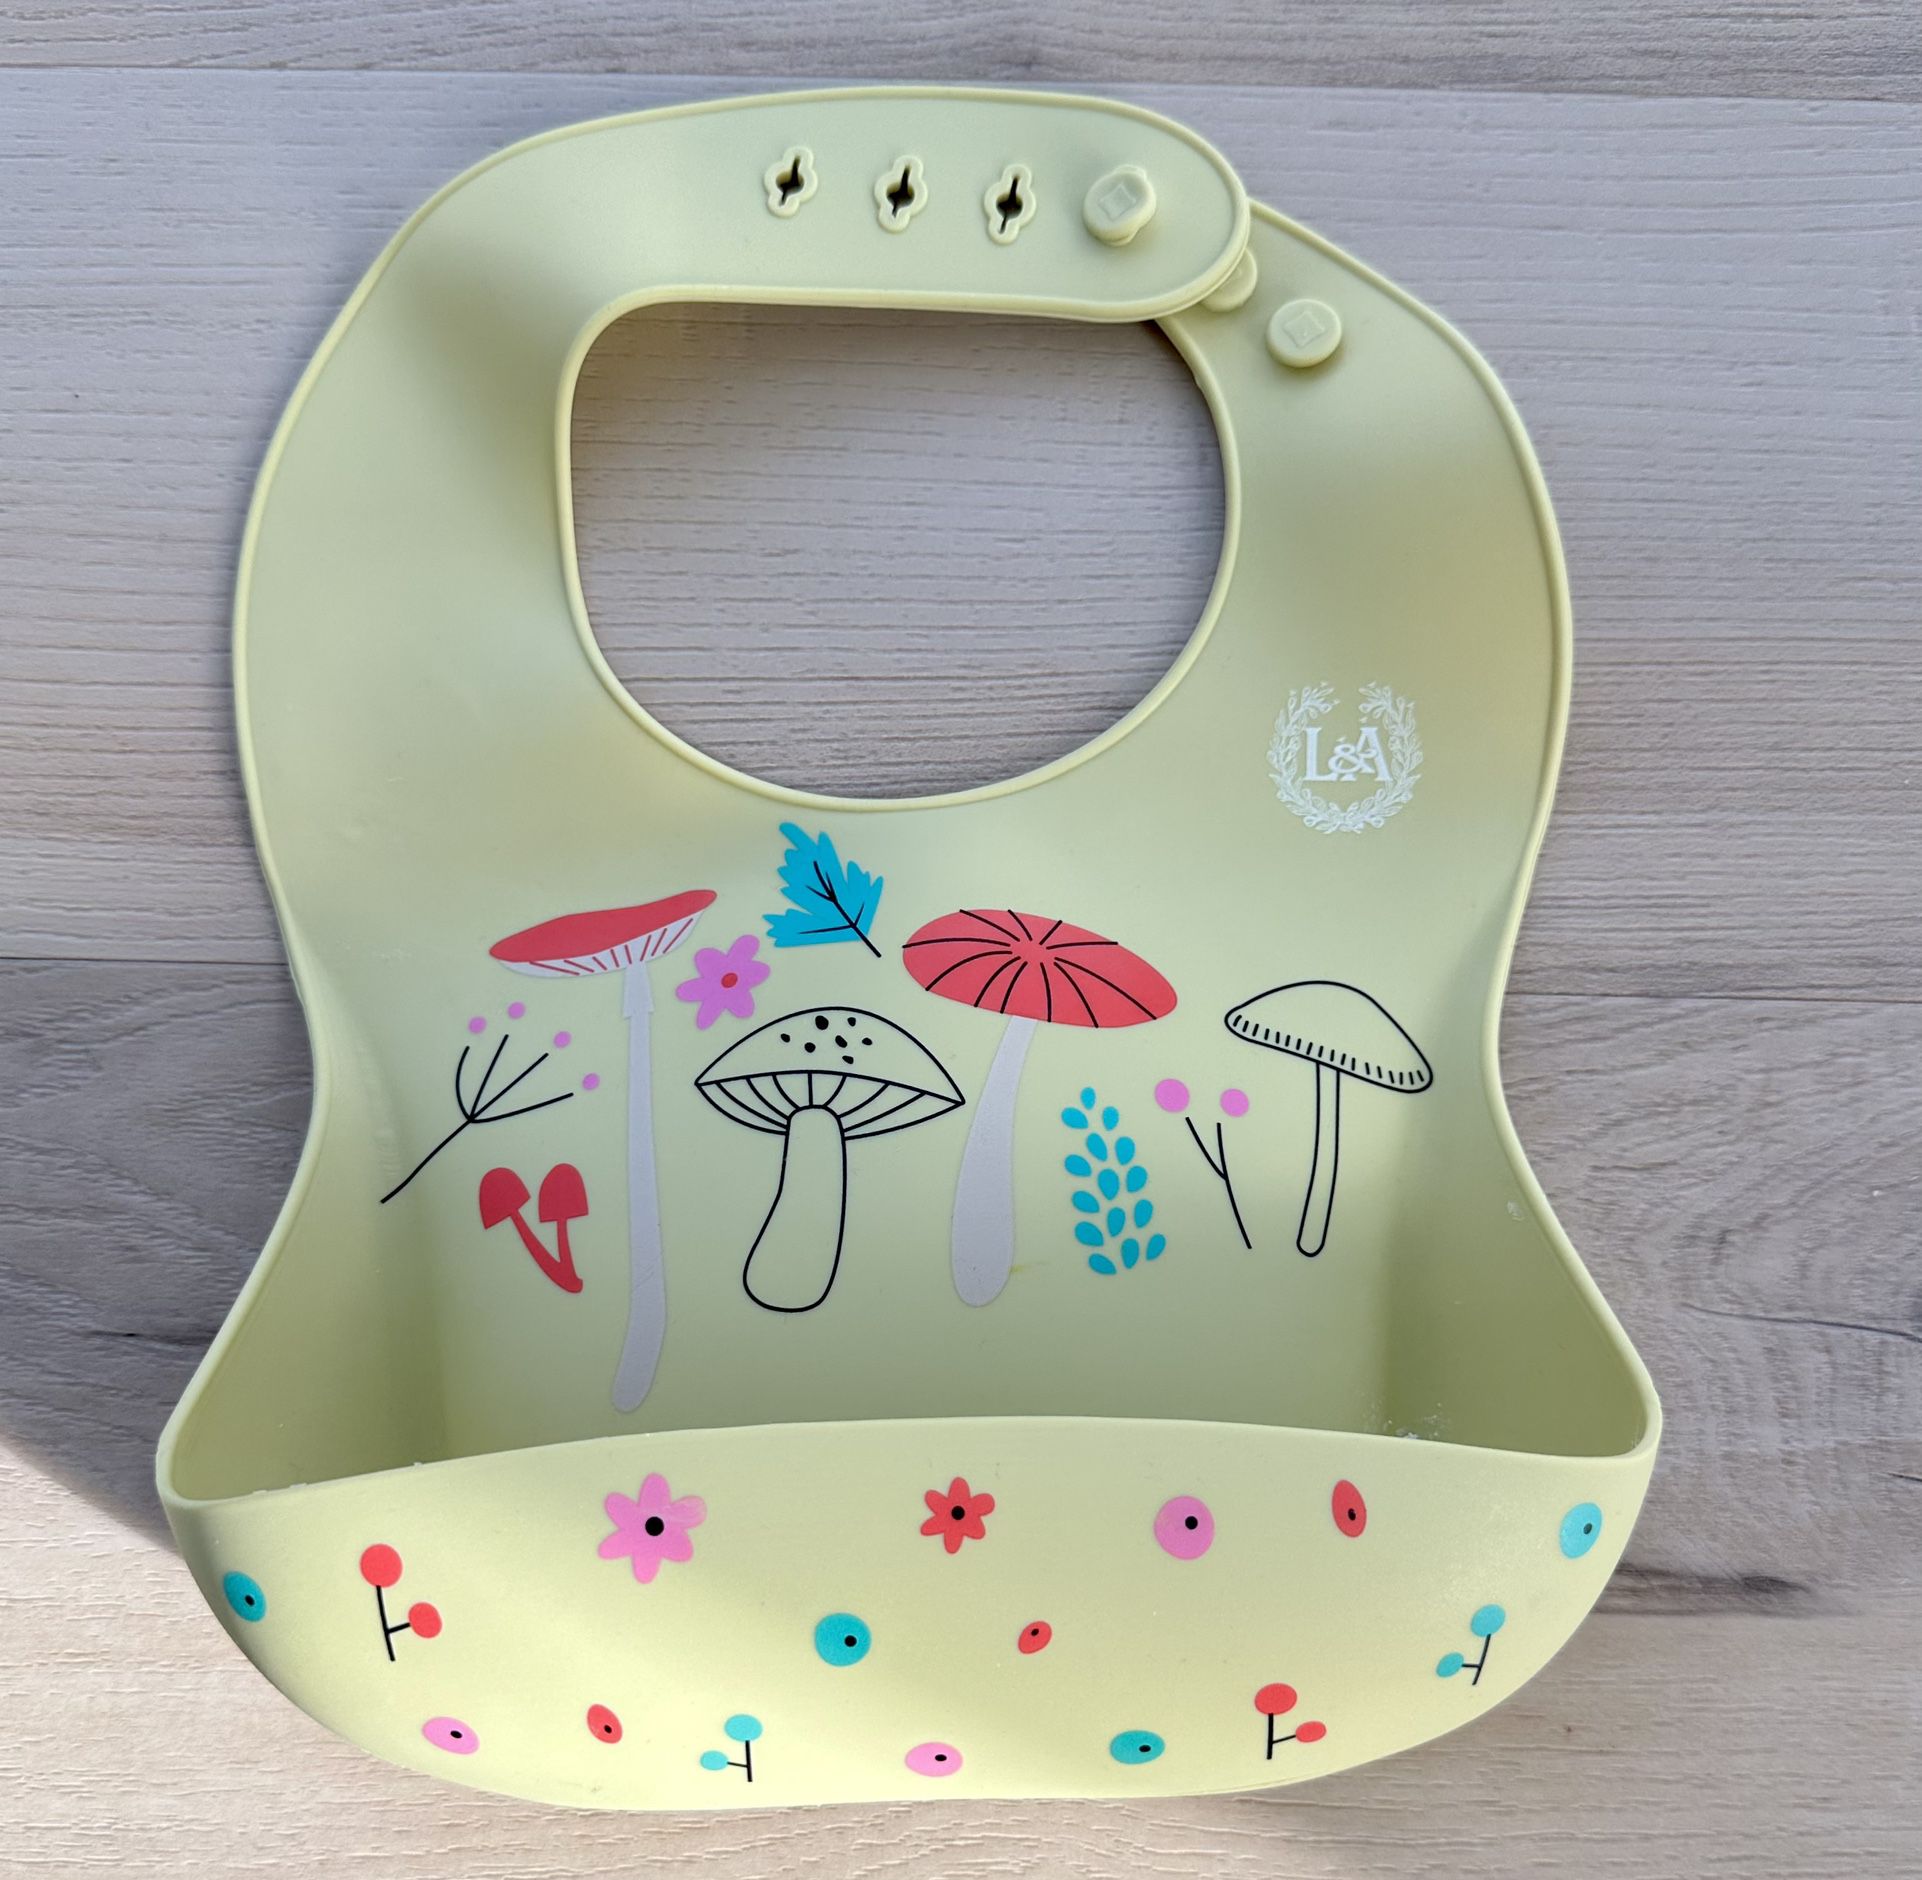 L&A Unisex Silicone Bib with Pouch for Baby/Toddler (Mushroom)